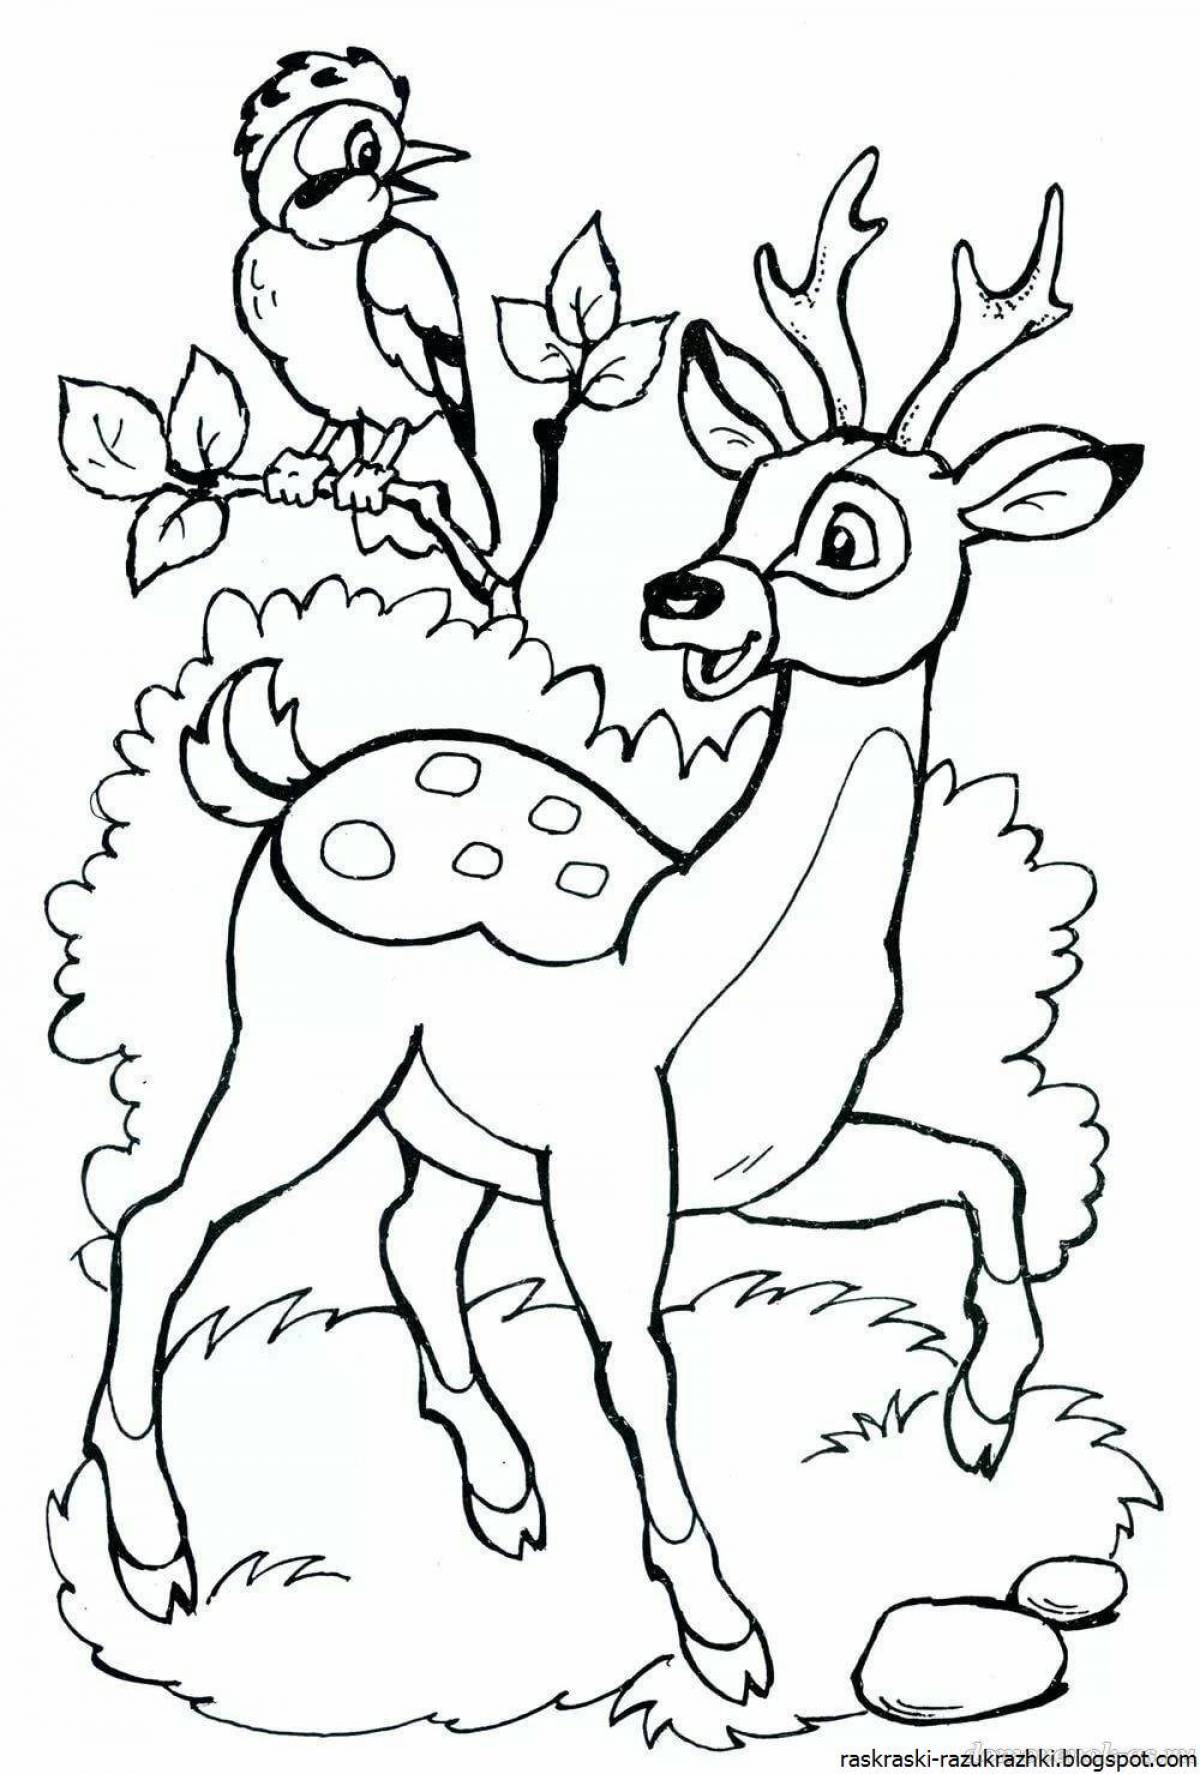 Fancy animal coloring book for kids 6-7 years old